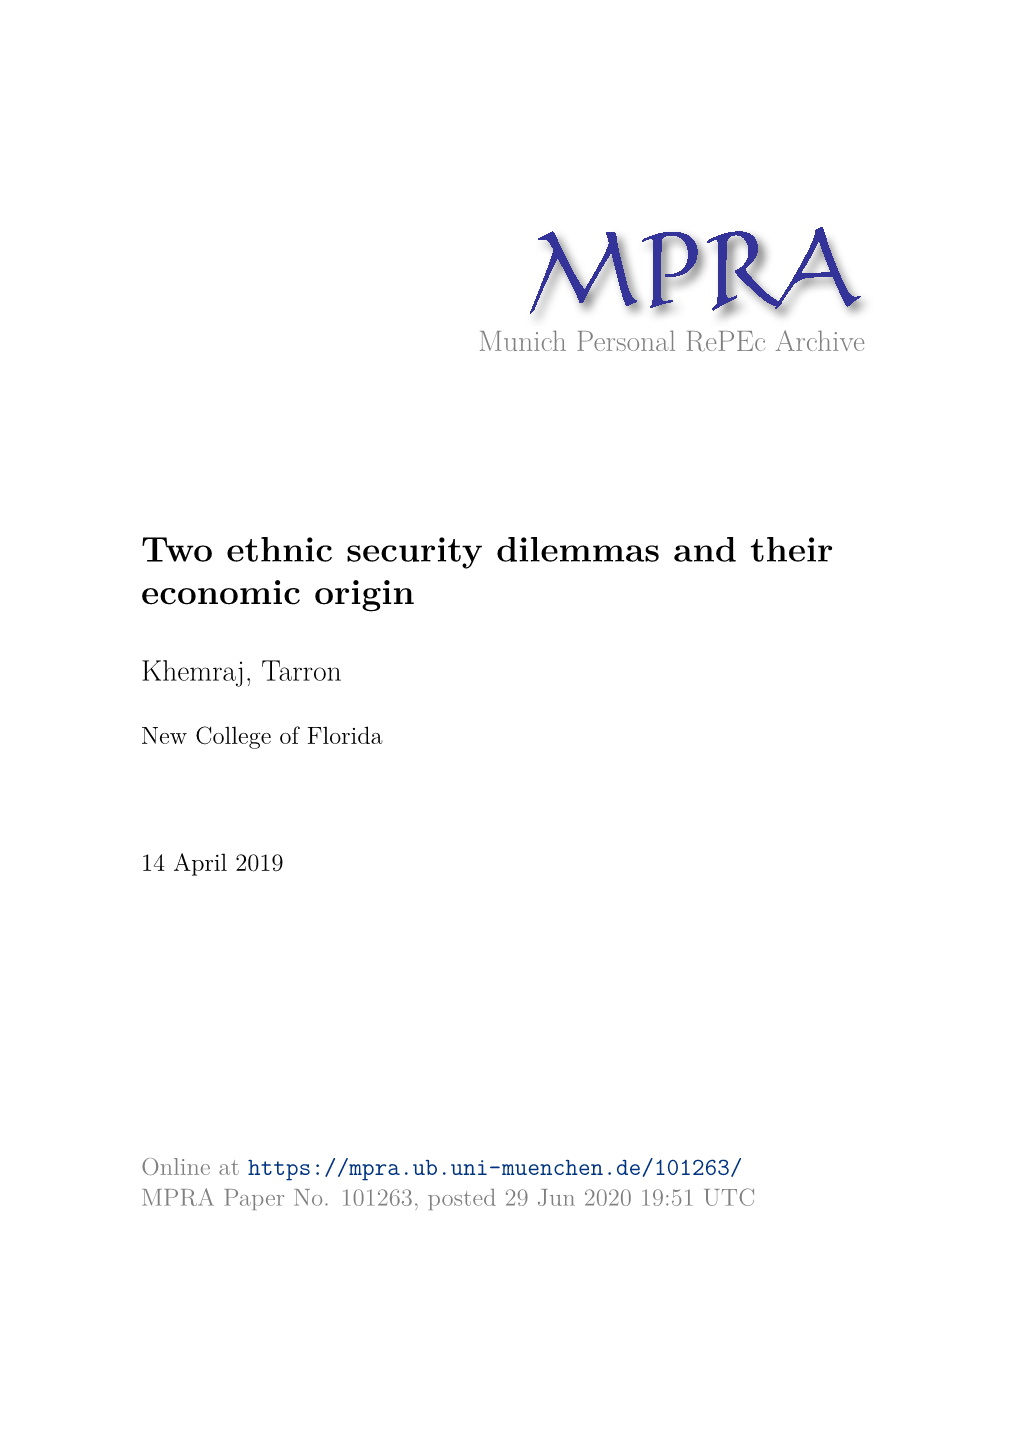 Two Ethnic Security Dilemmas and Their Economic Origin